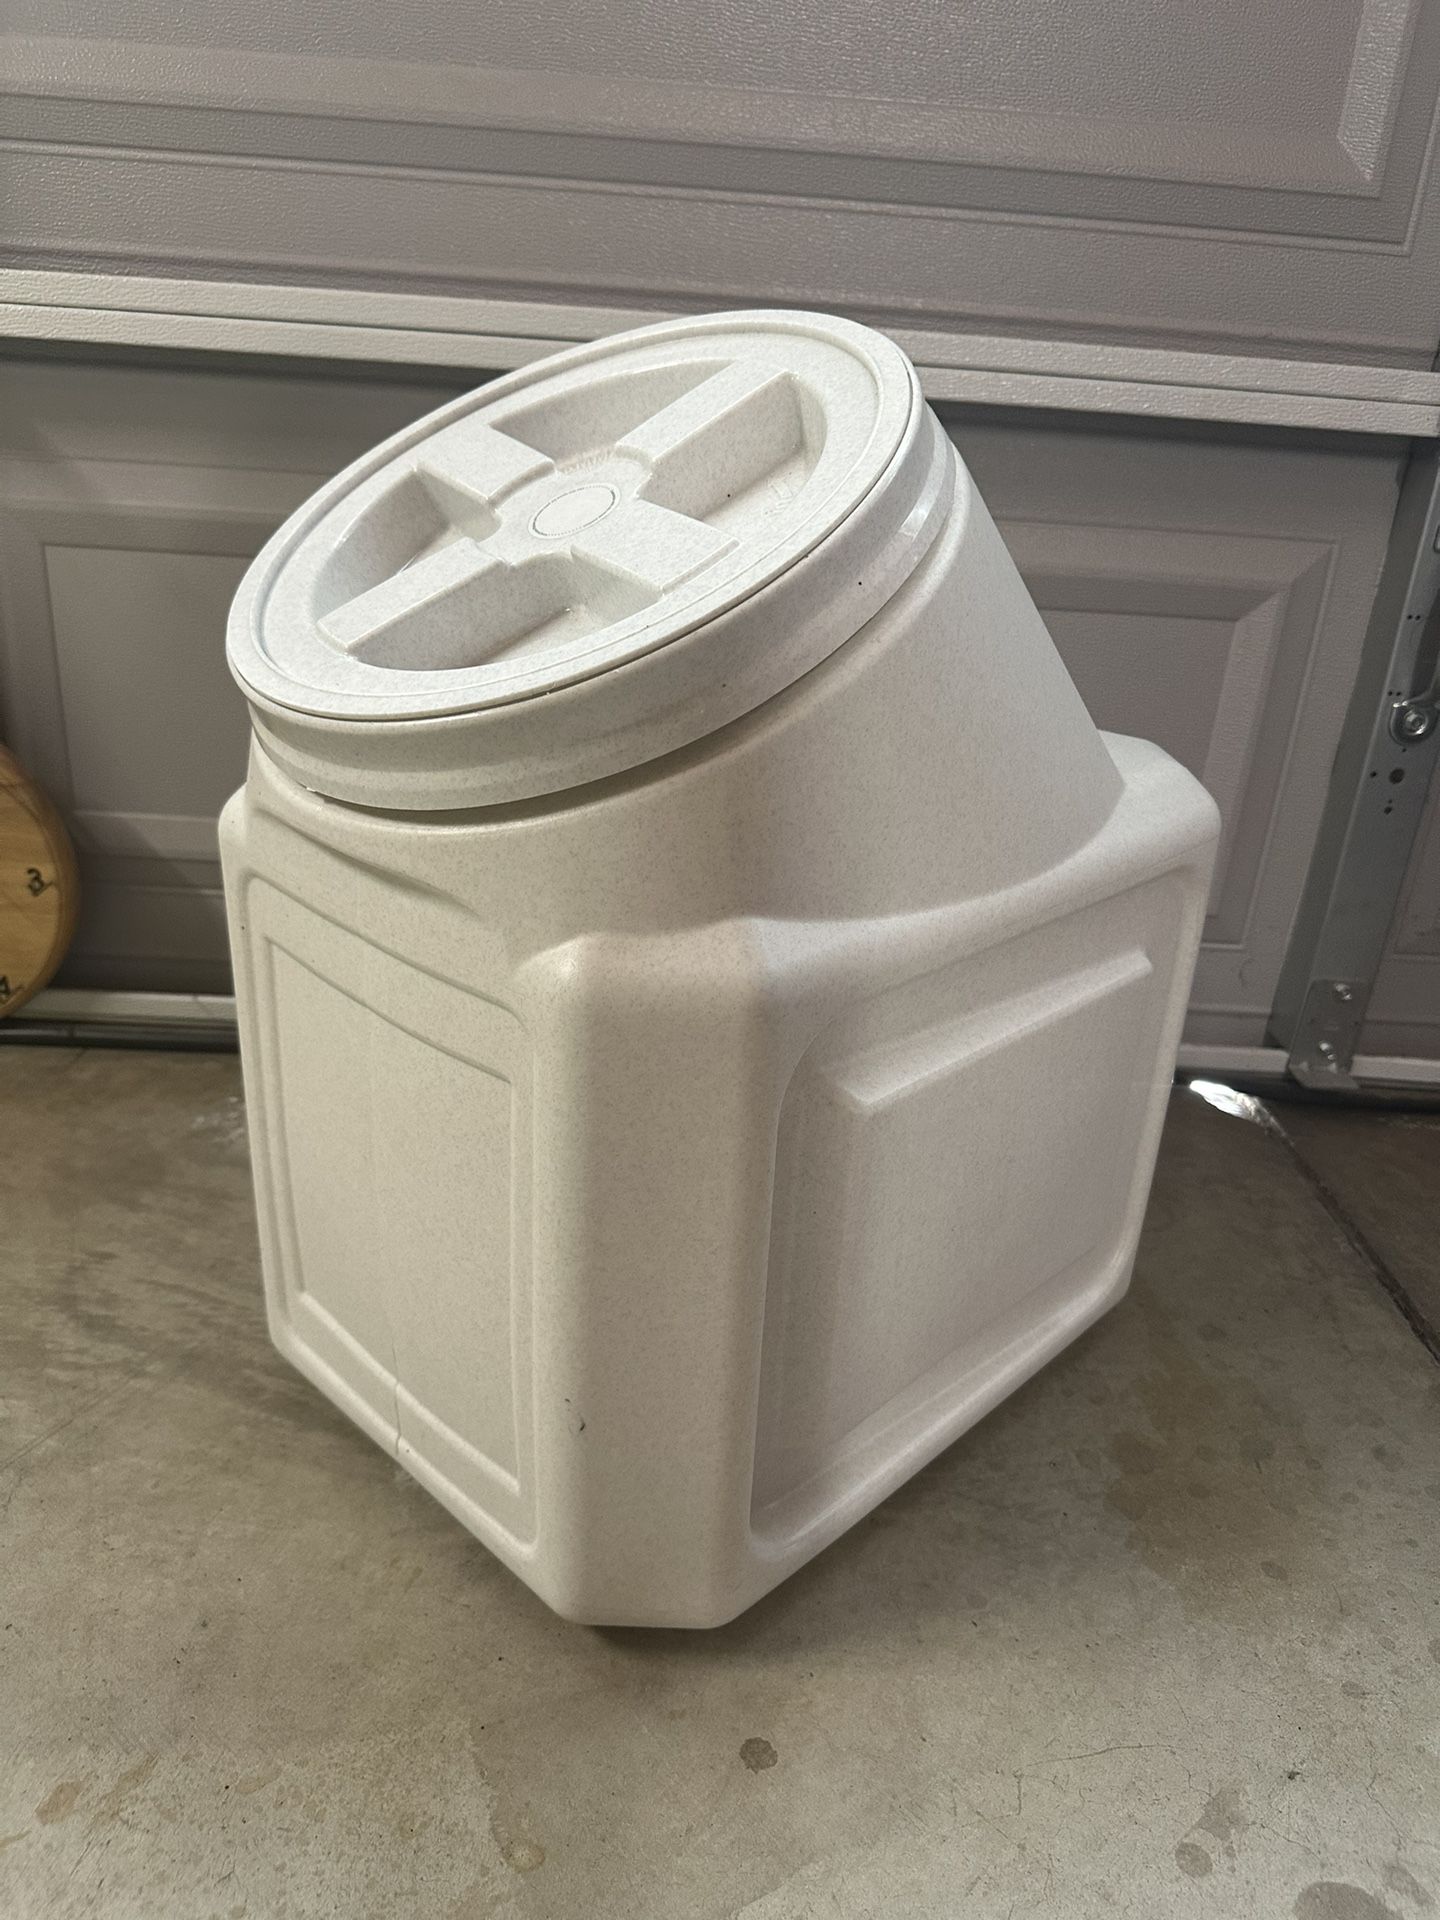 Dog/cat food Container